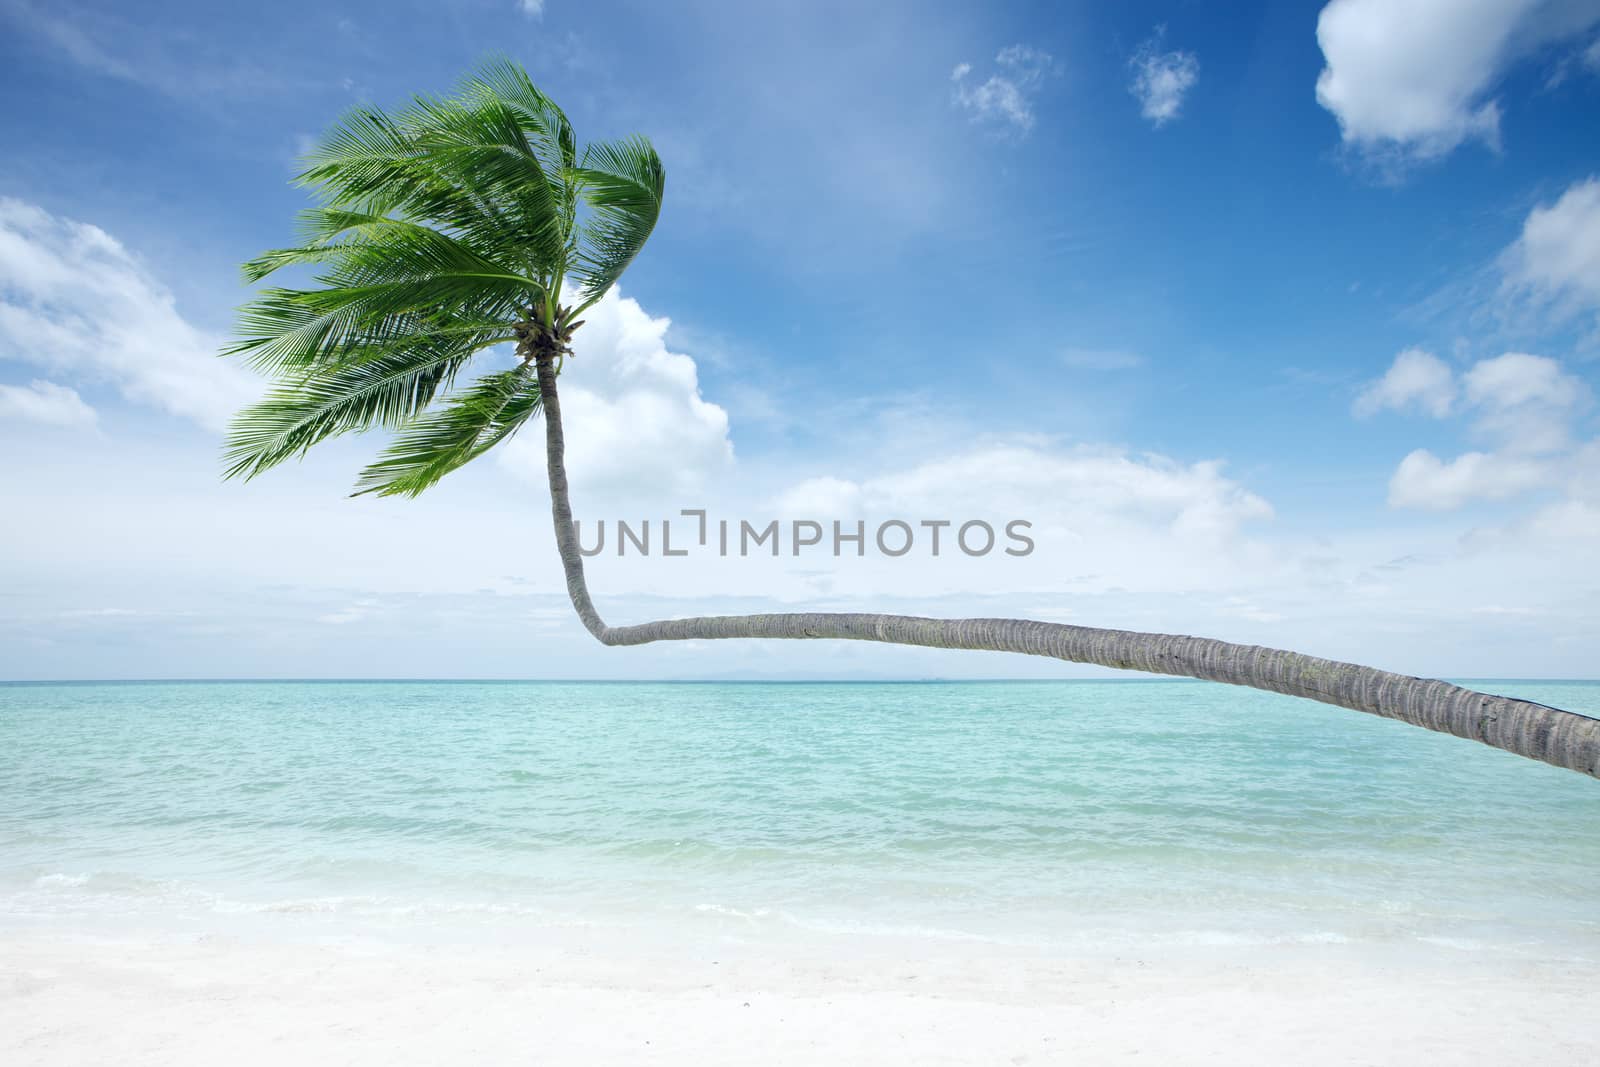 View of nice tropical beach with some palm